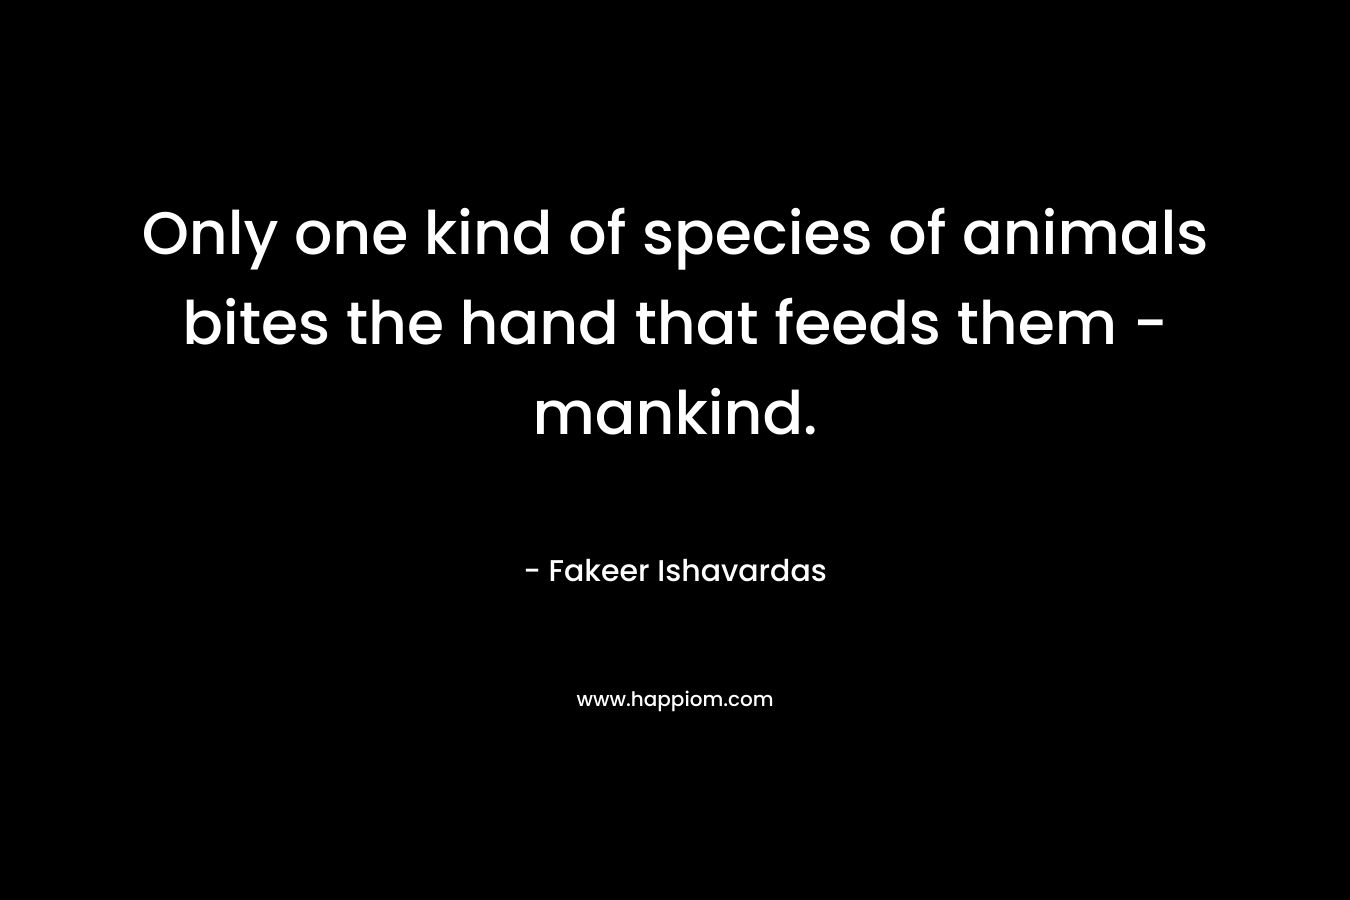 Only one kind of species of animals bites the hand that feeds them - mankind.